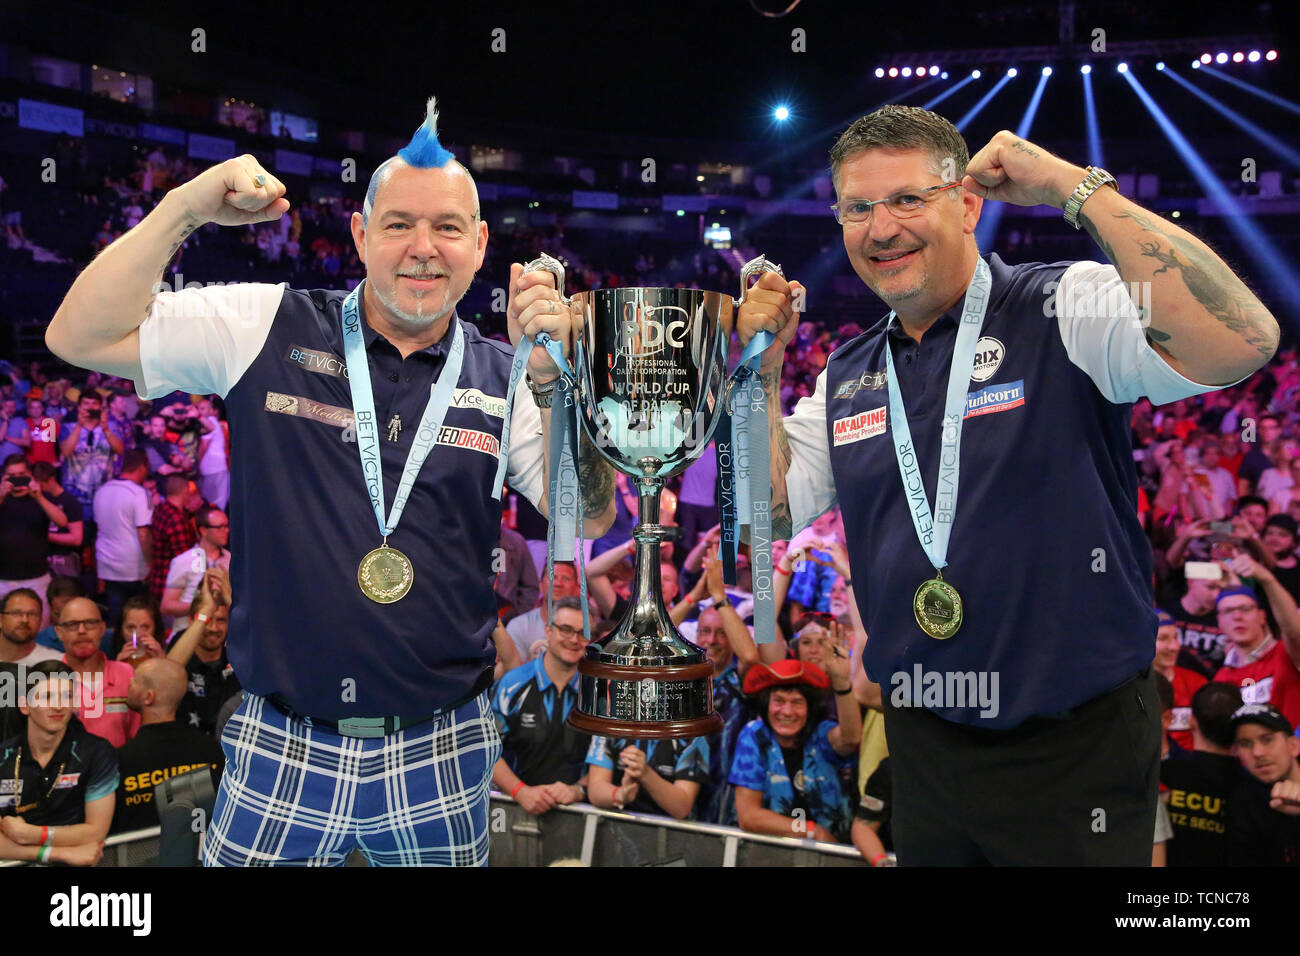 Hamburg, Germany. 09th June, 2019. Darts: Team World Championship, Final:  Scotland - Ireland. The winning team Peter Wright (l) and Gary Anderson  from Scotland pose with their trophy after the victory. Credit: